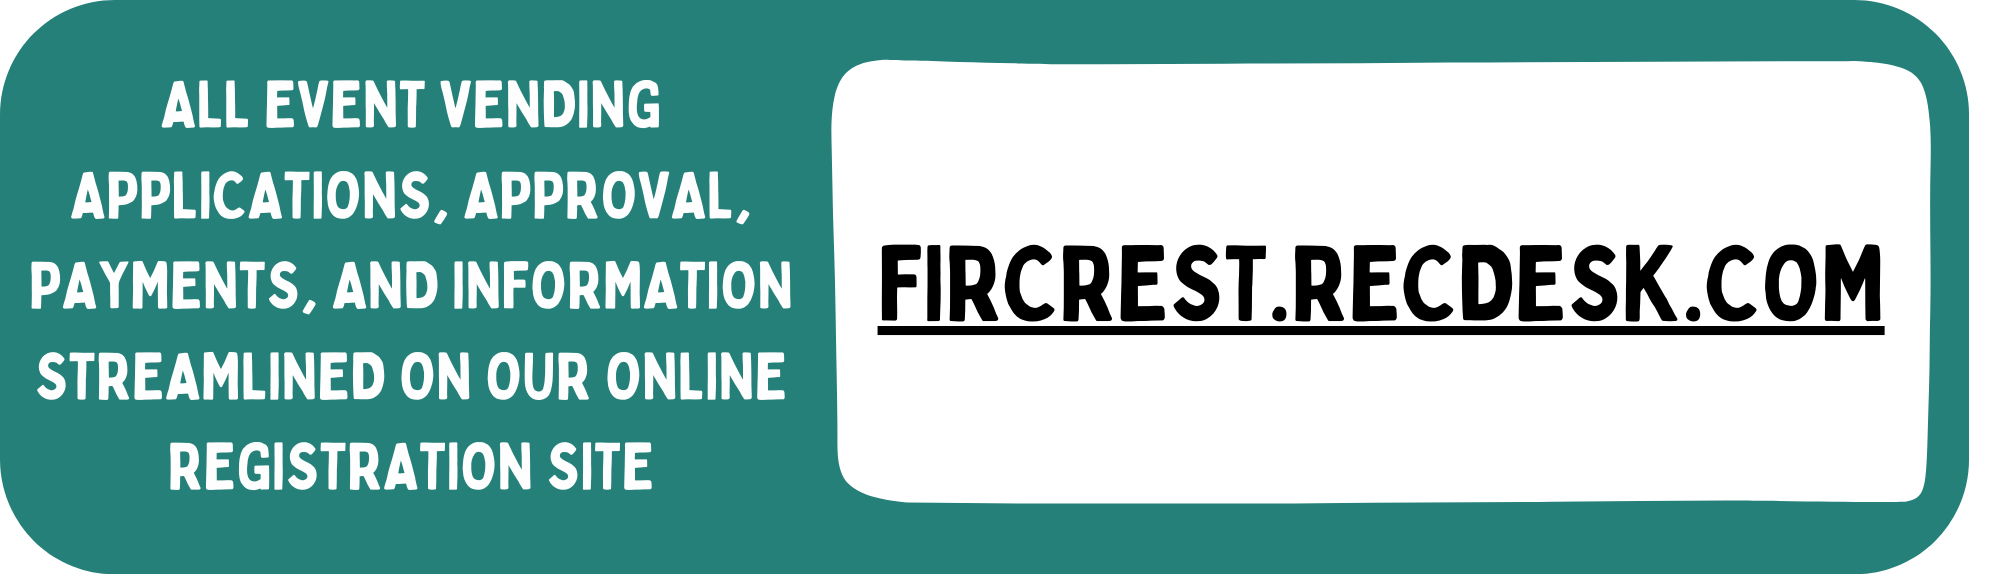 Banner and link for Fircrest.recdesk.com - text that reads: All event vending, applications, approval, payments and information streamlined on our online registration site - fircrest.recdesk.com